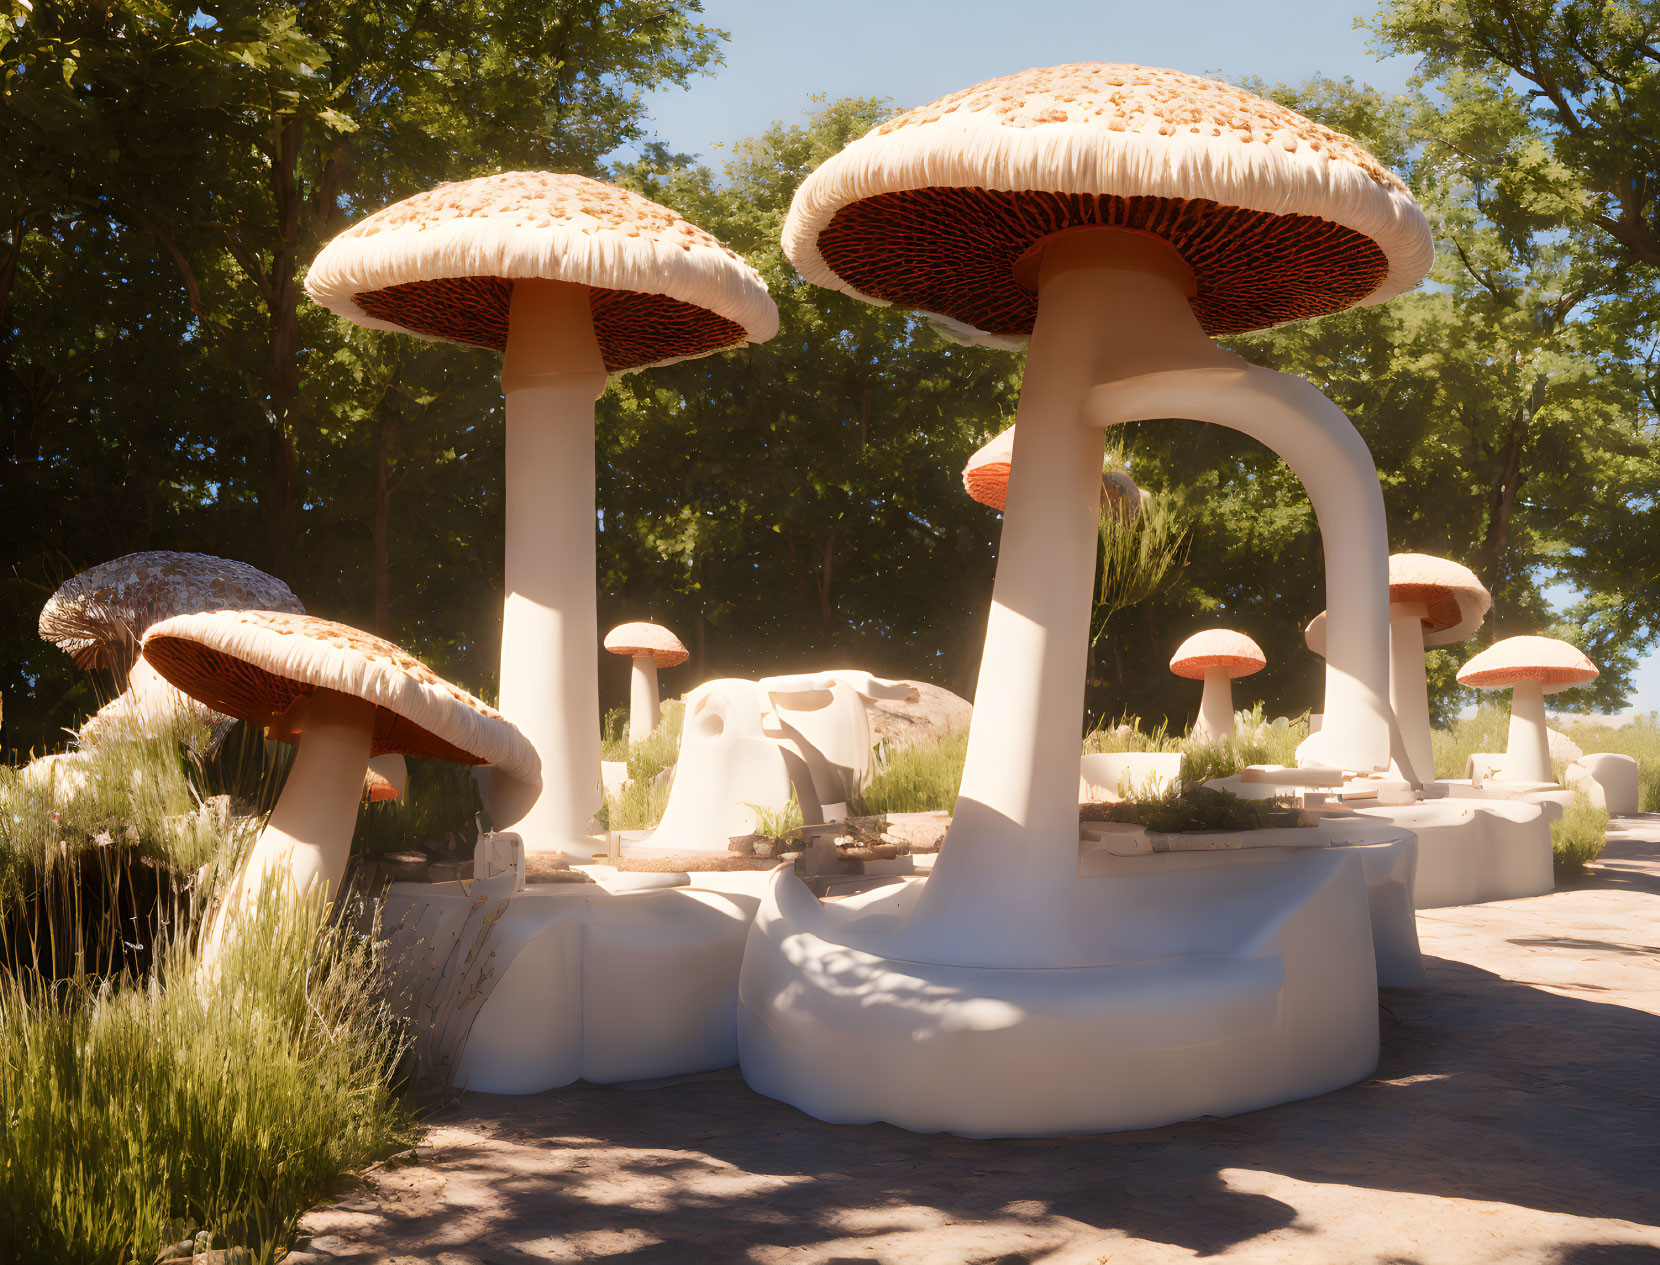 Digital Render of Oversized Mushroom Grove with Red-Capped Fungi amid Green Foliage